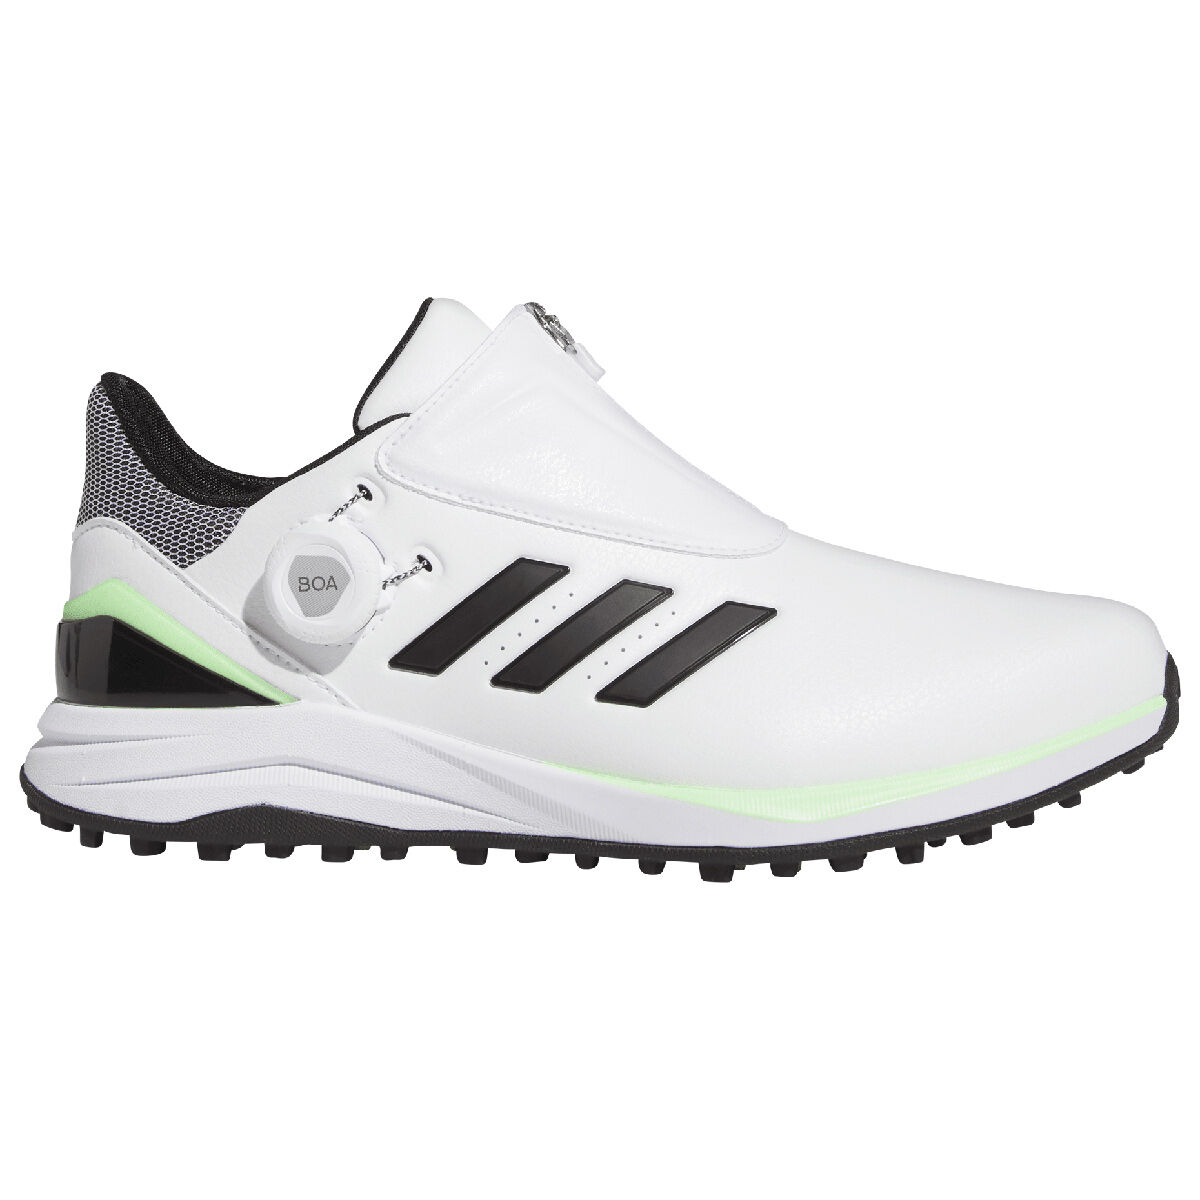 adidas SOLARmotion BOA Spikeless Waterproof Golf Shoes, Mens, White/core black/green spark, 9 | American Golf